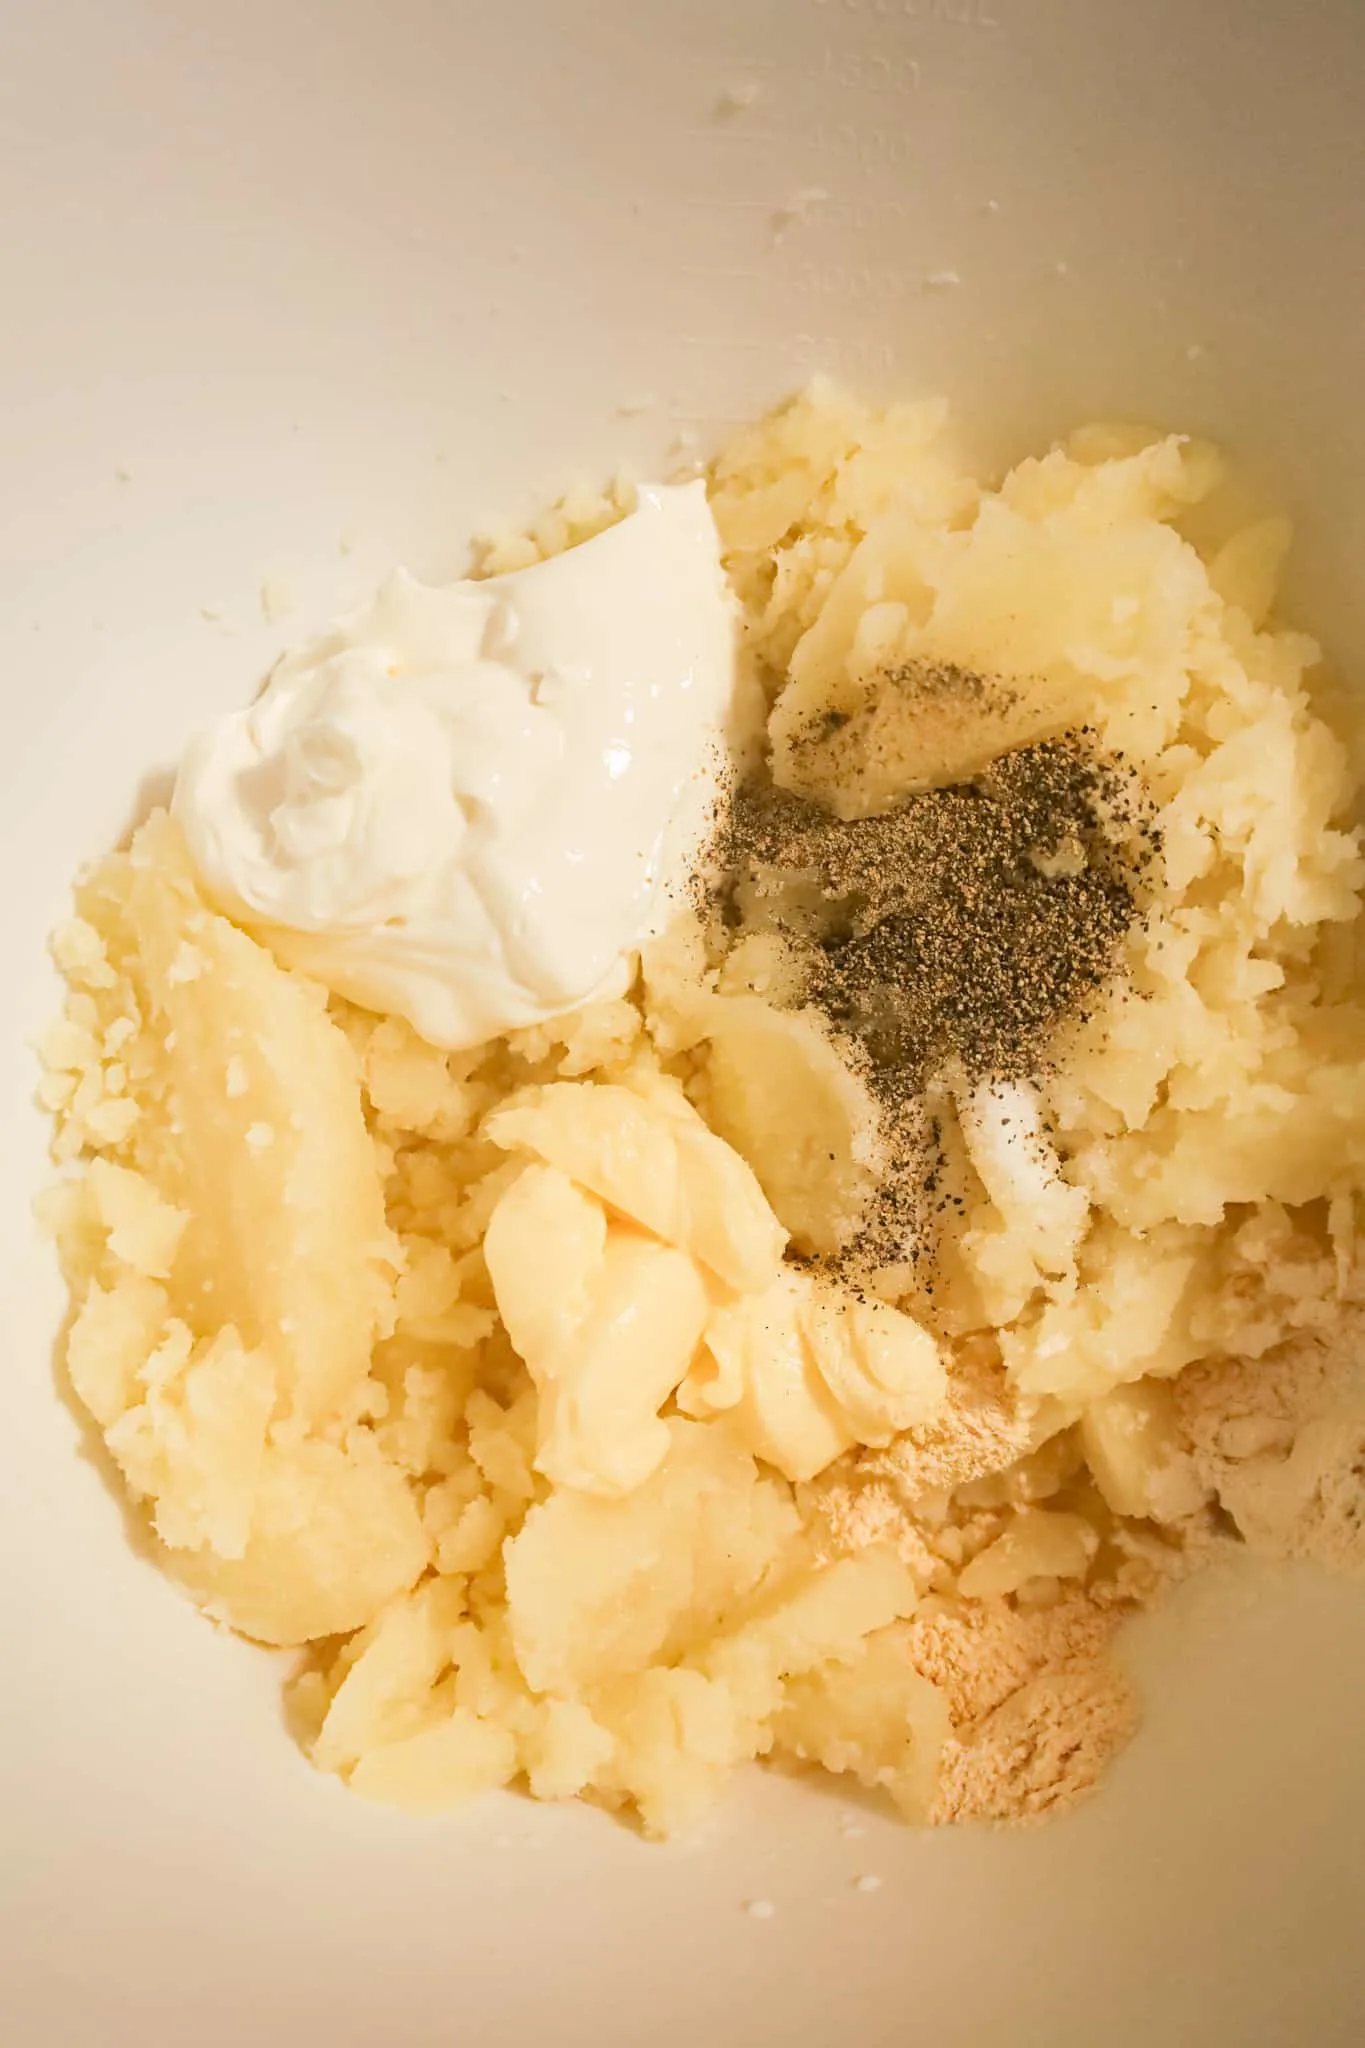 butter, sour cream and spices on top of mashed potatoes in a mixing bowl